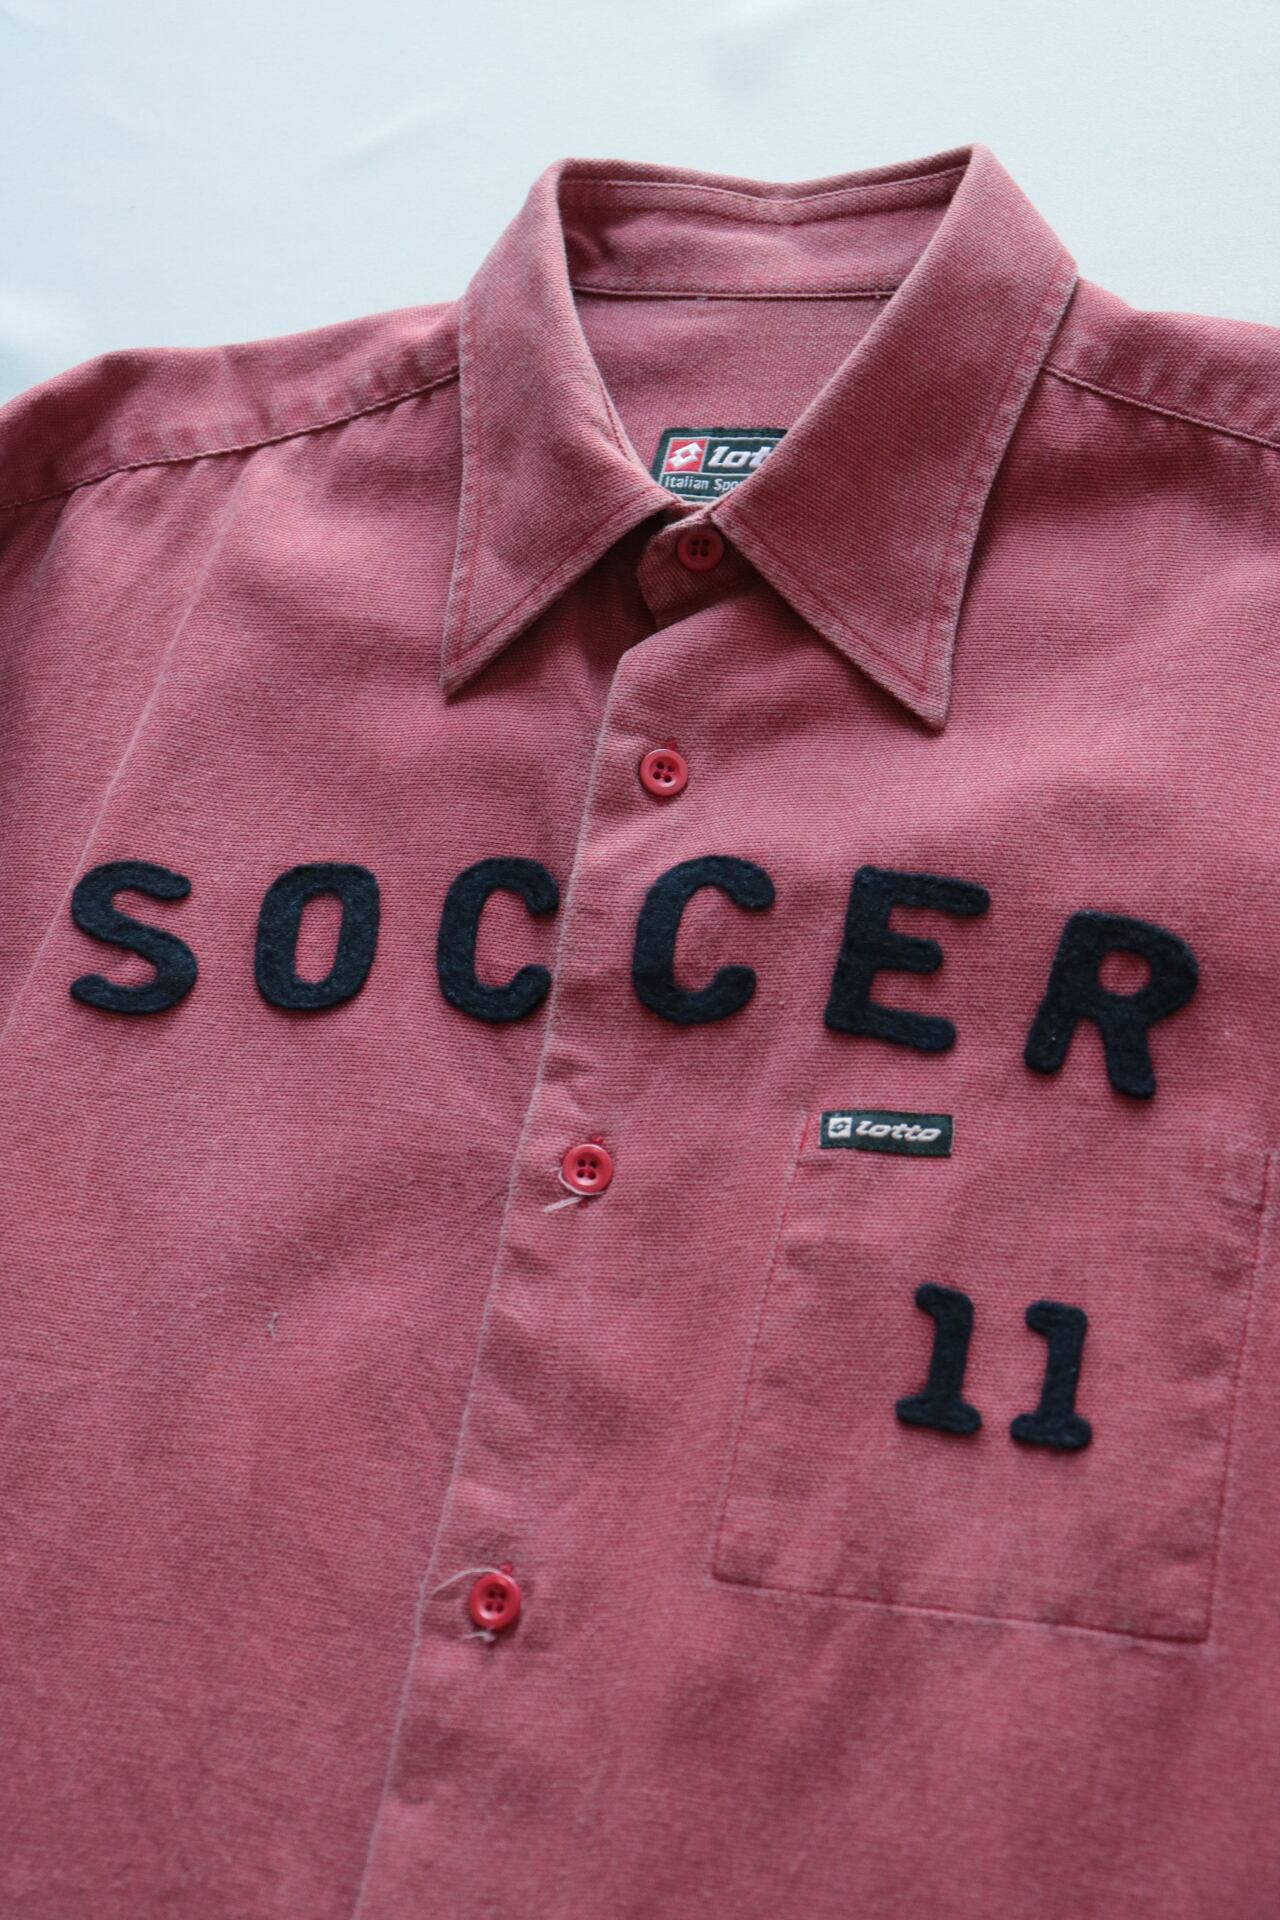 Vintage lotto soccer patch shirt